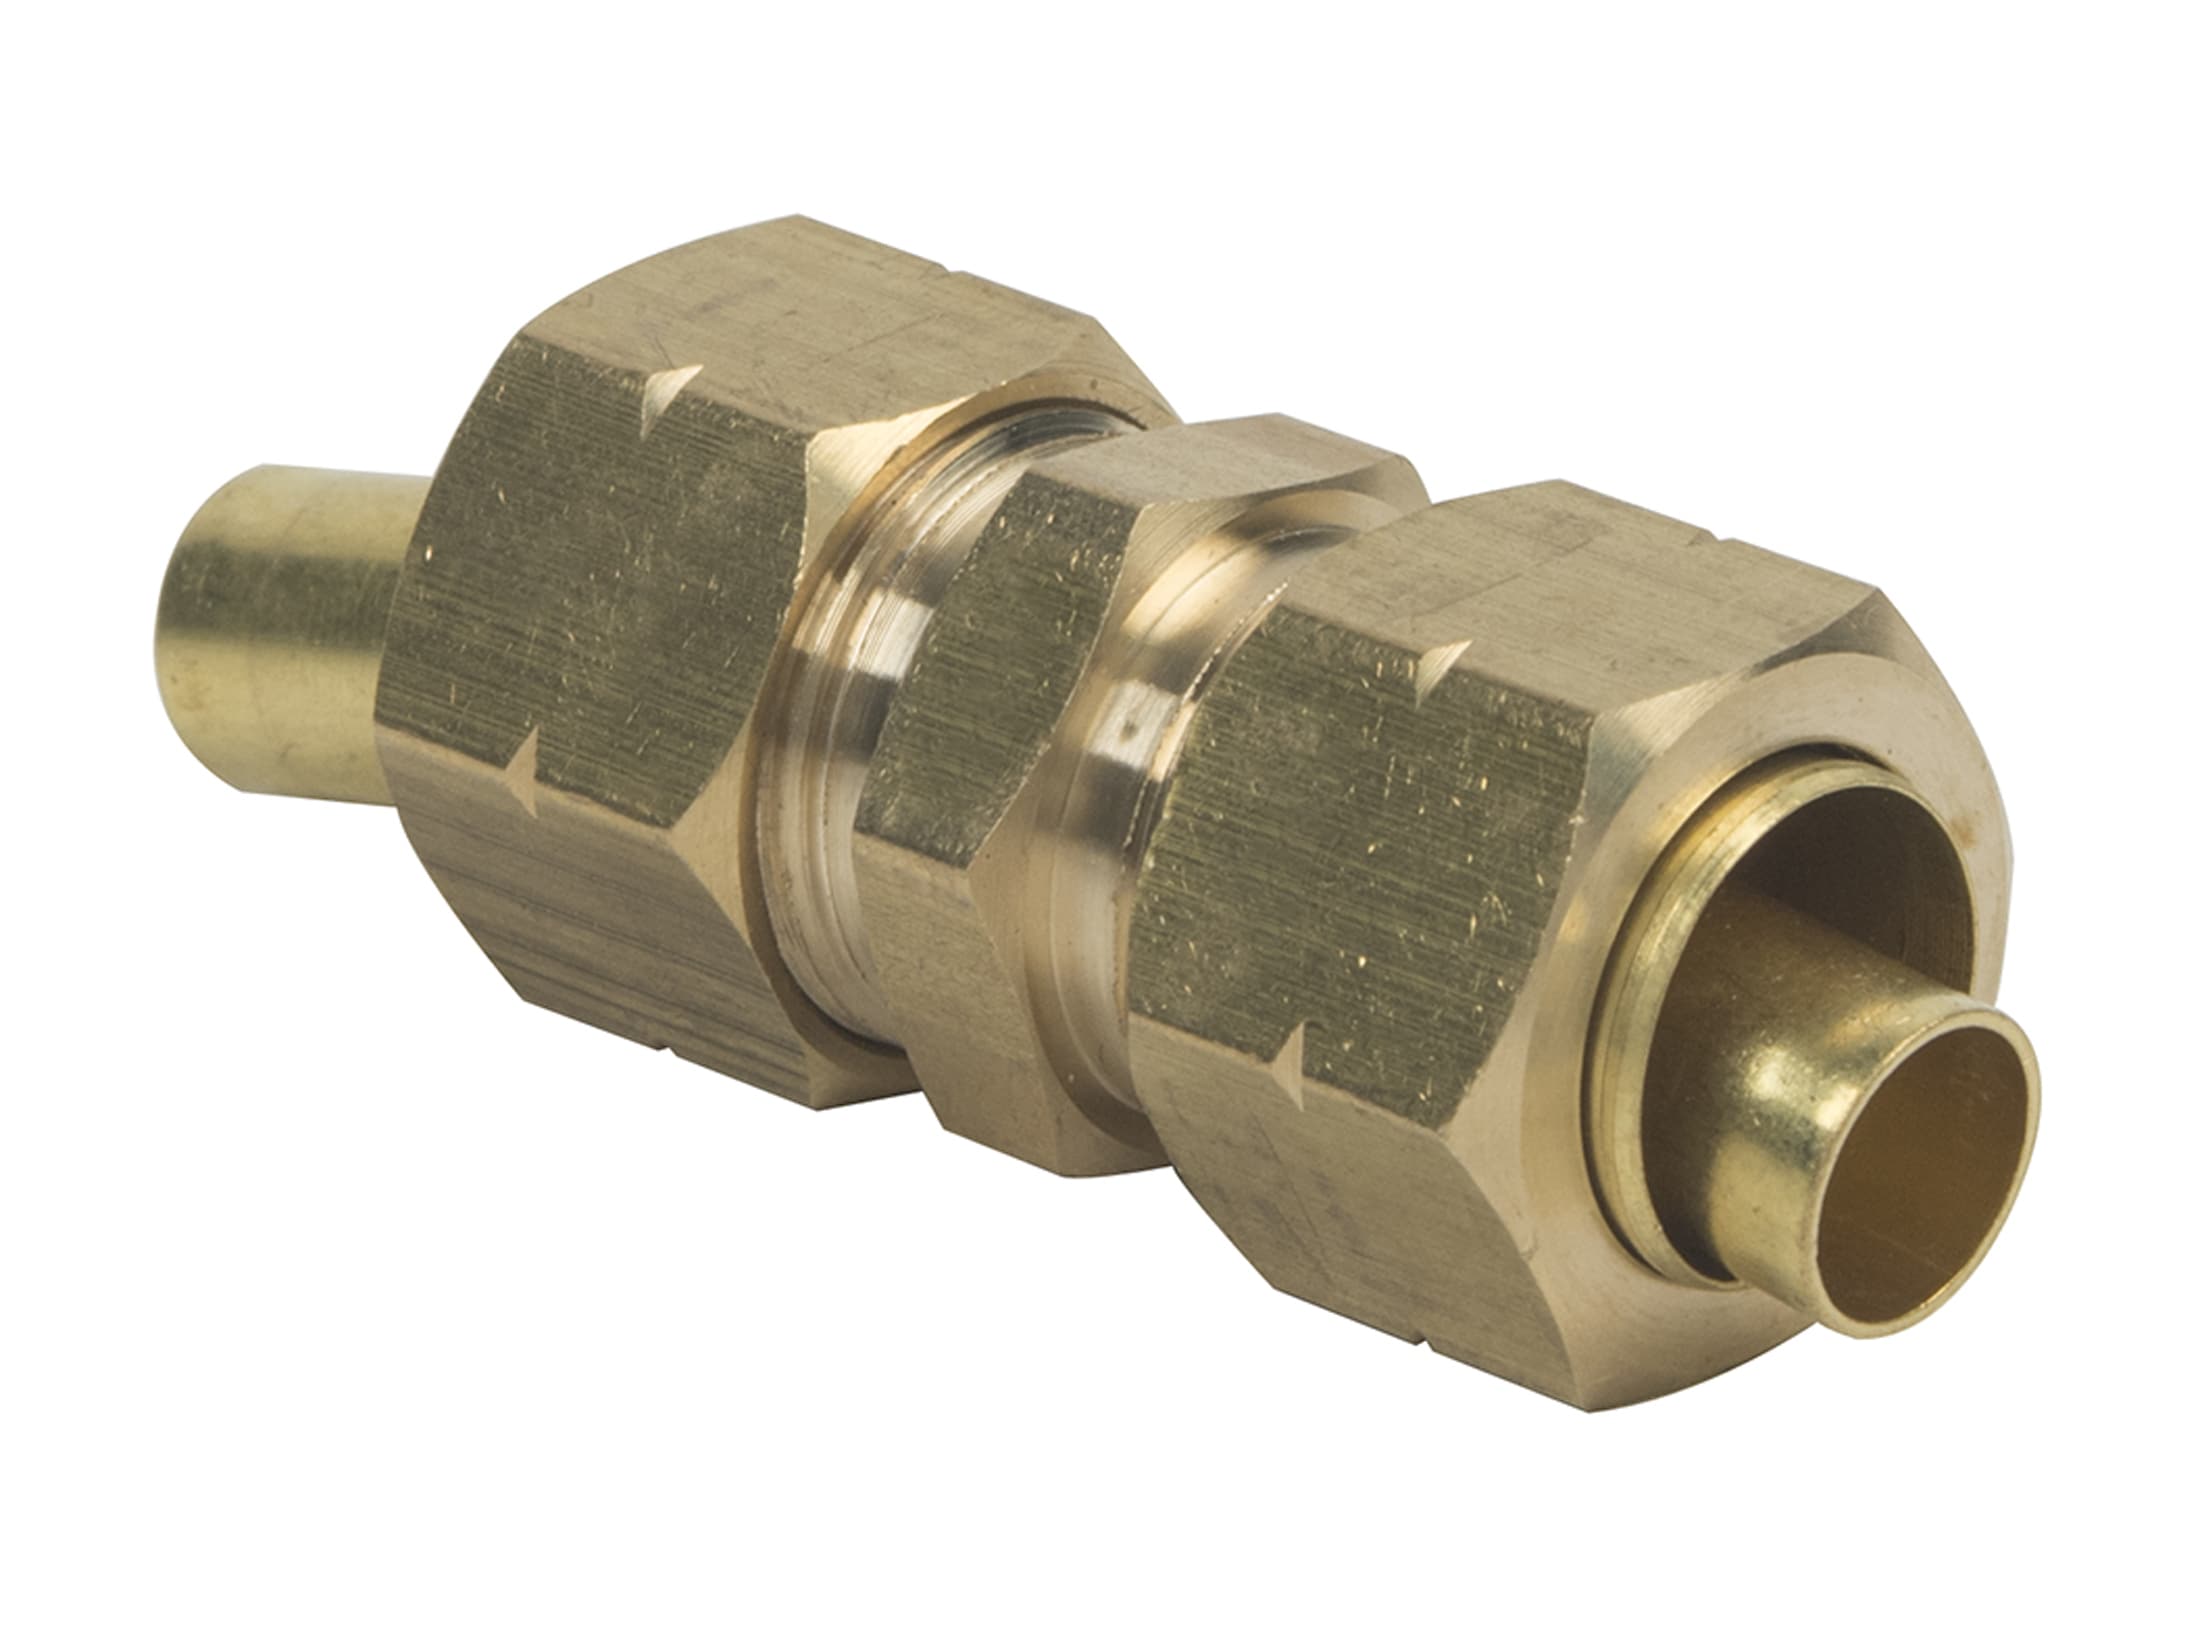 BrassCraft 1/2-in x 1/2-in Compression Coupling Fitting at